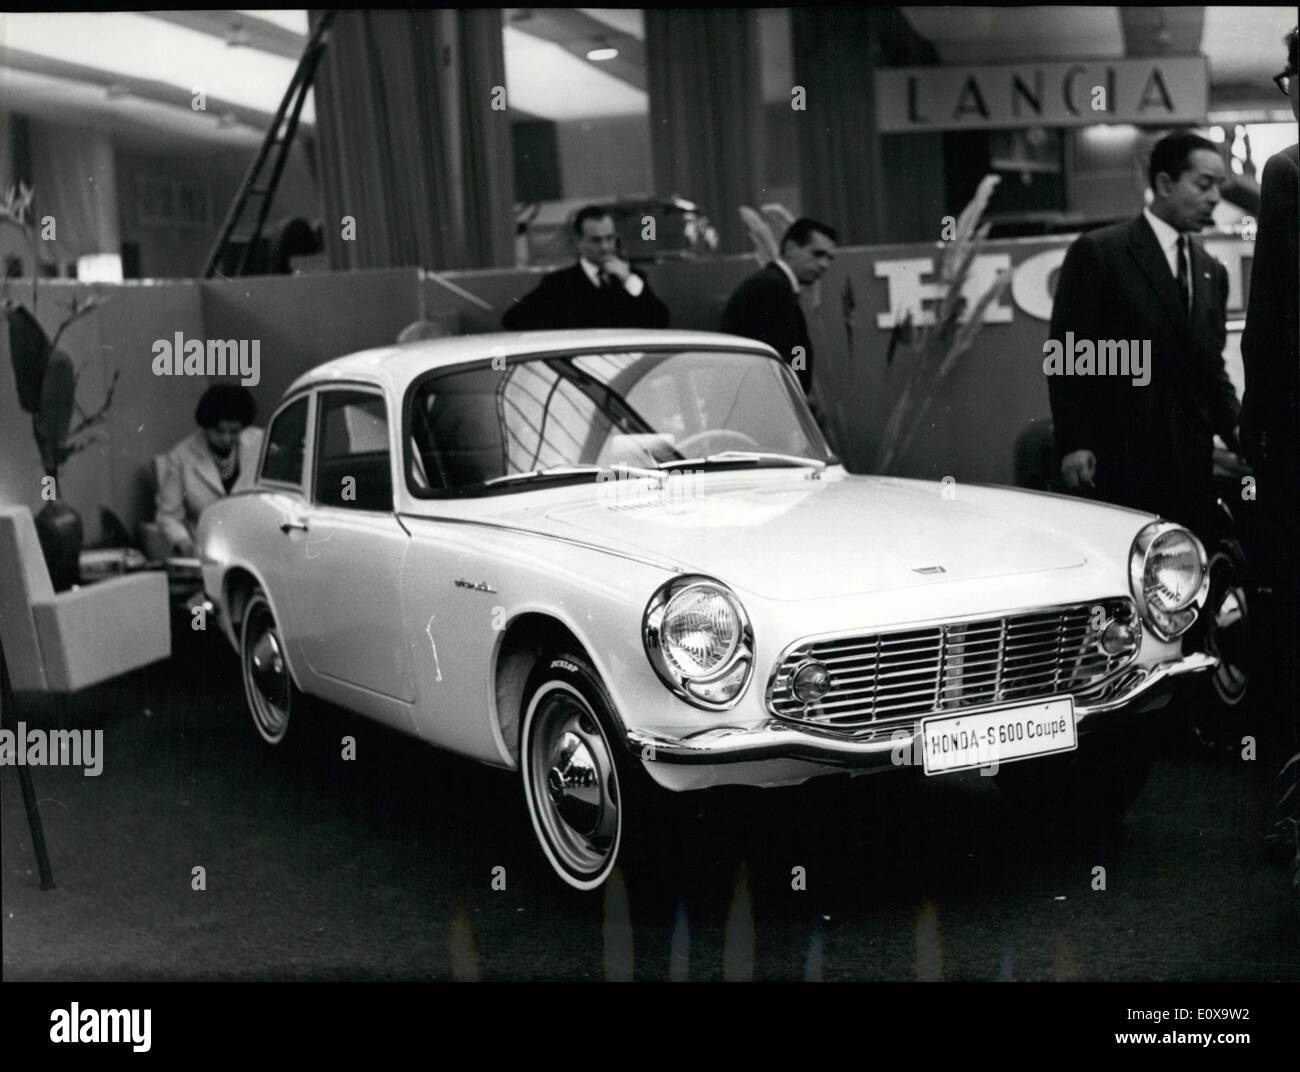 Oct. 10, 1965 - Motor Show Opens: Photo Shows Japanese Car Hinda at the Motor Show now being held at the Porte De Versailles, Paris. Stock Photo